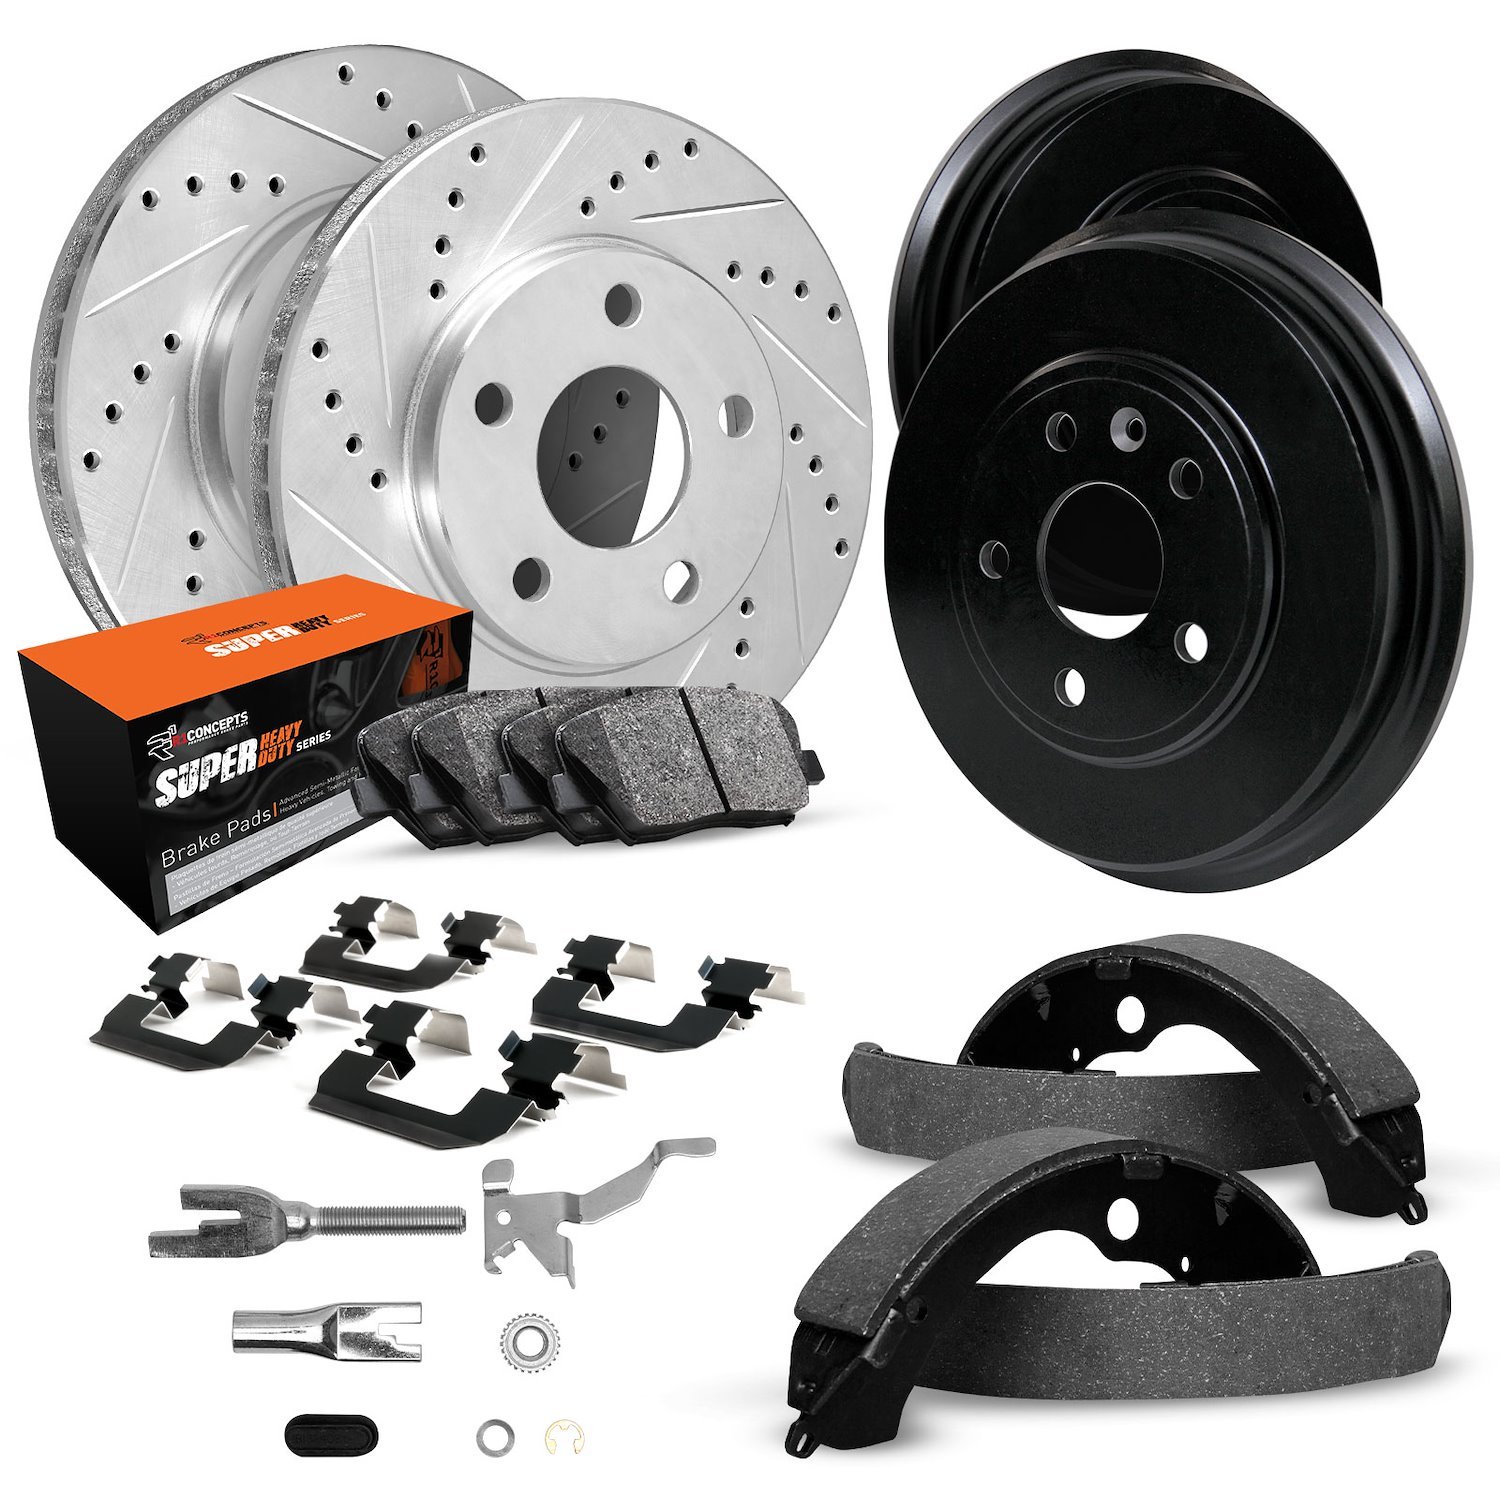 E-Line Drilled/Slotted Silver Rotor & Drum Set w/Super-Duty Pads, Shoes/Hardware/Adjusters, 1995-2002 Ford/Lincoln/Mercury/Mazda